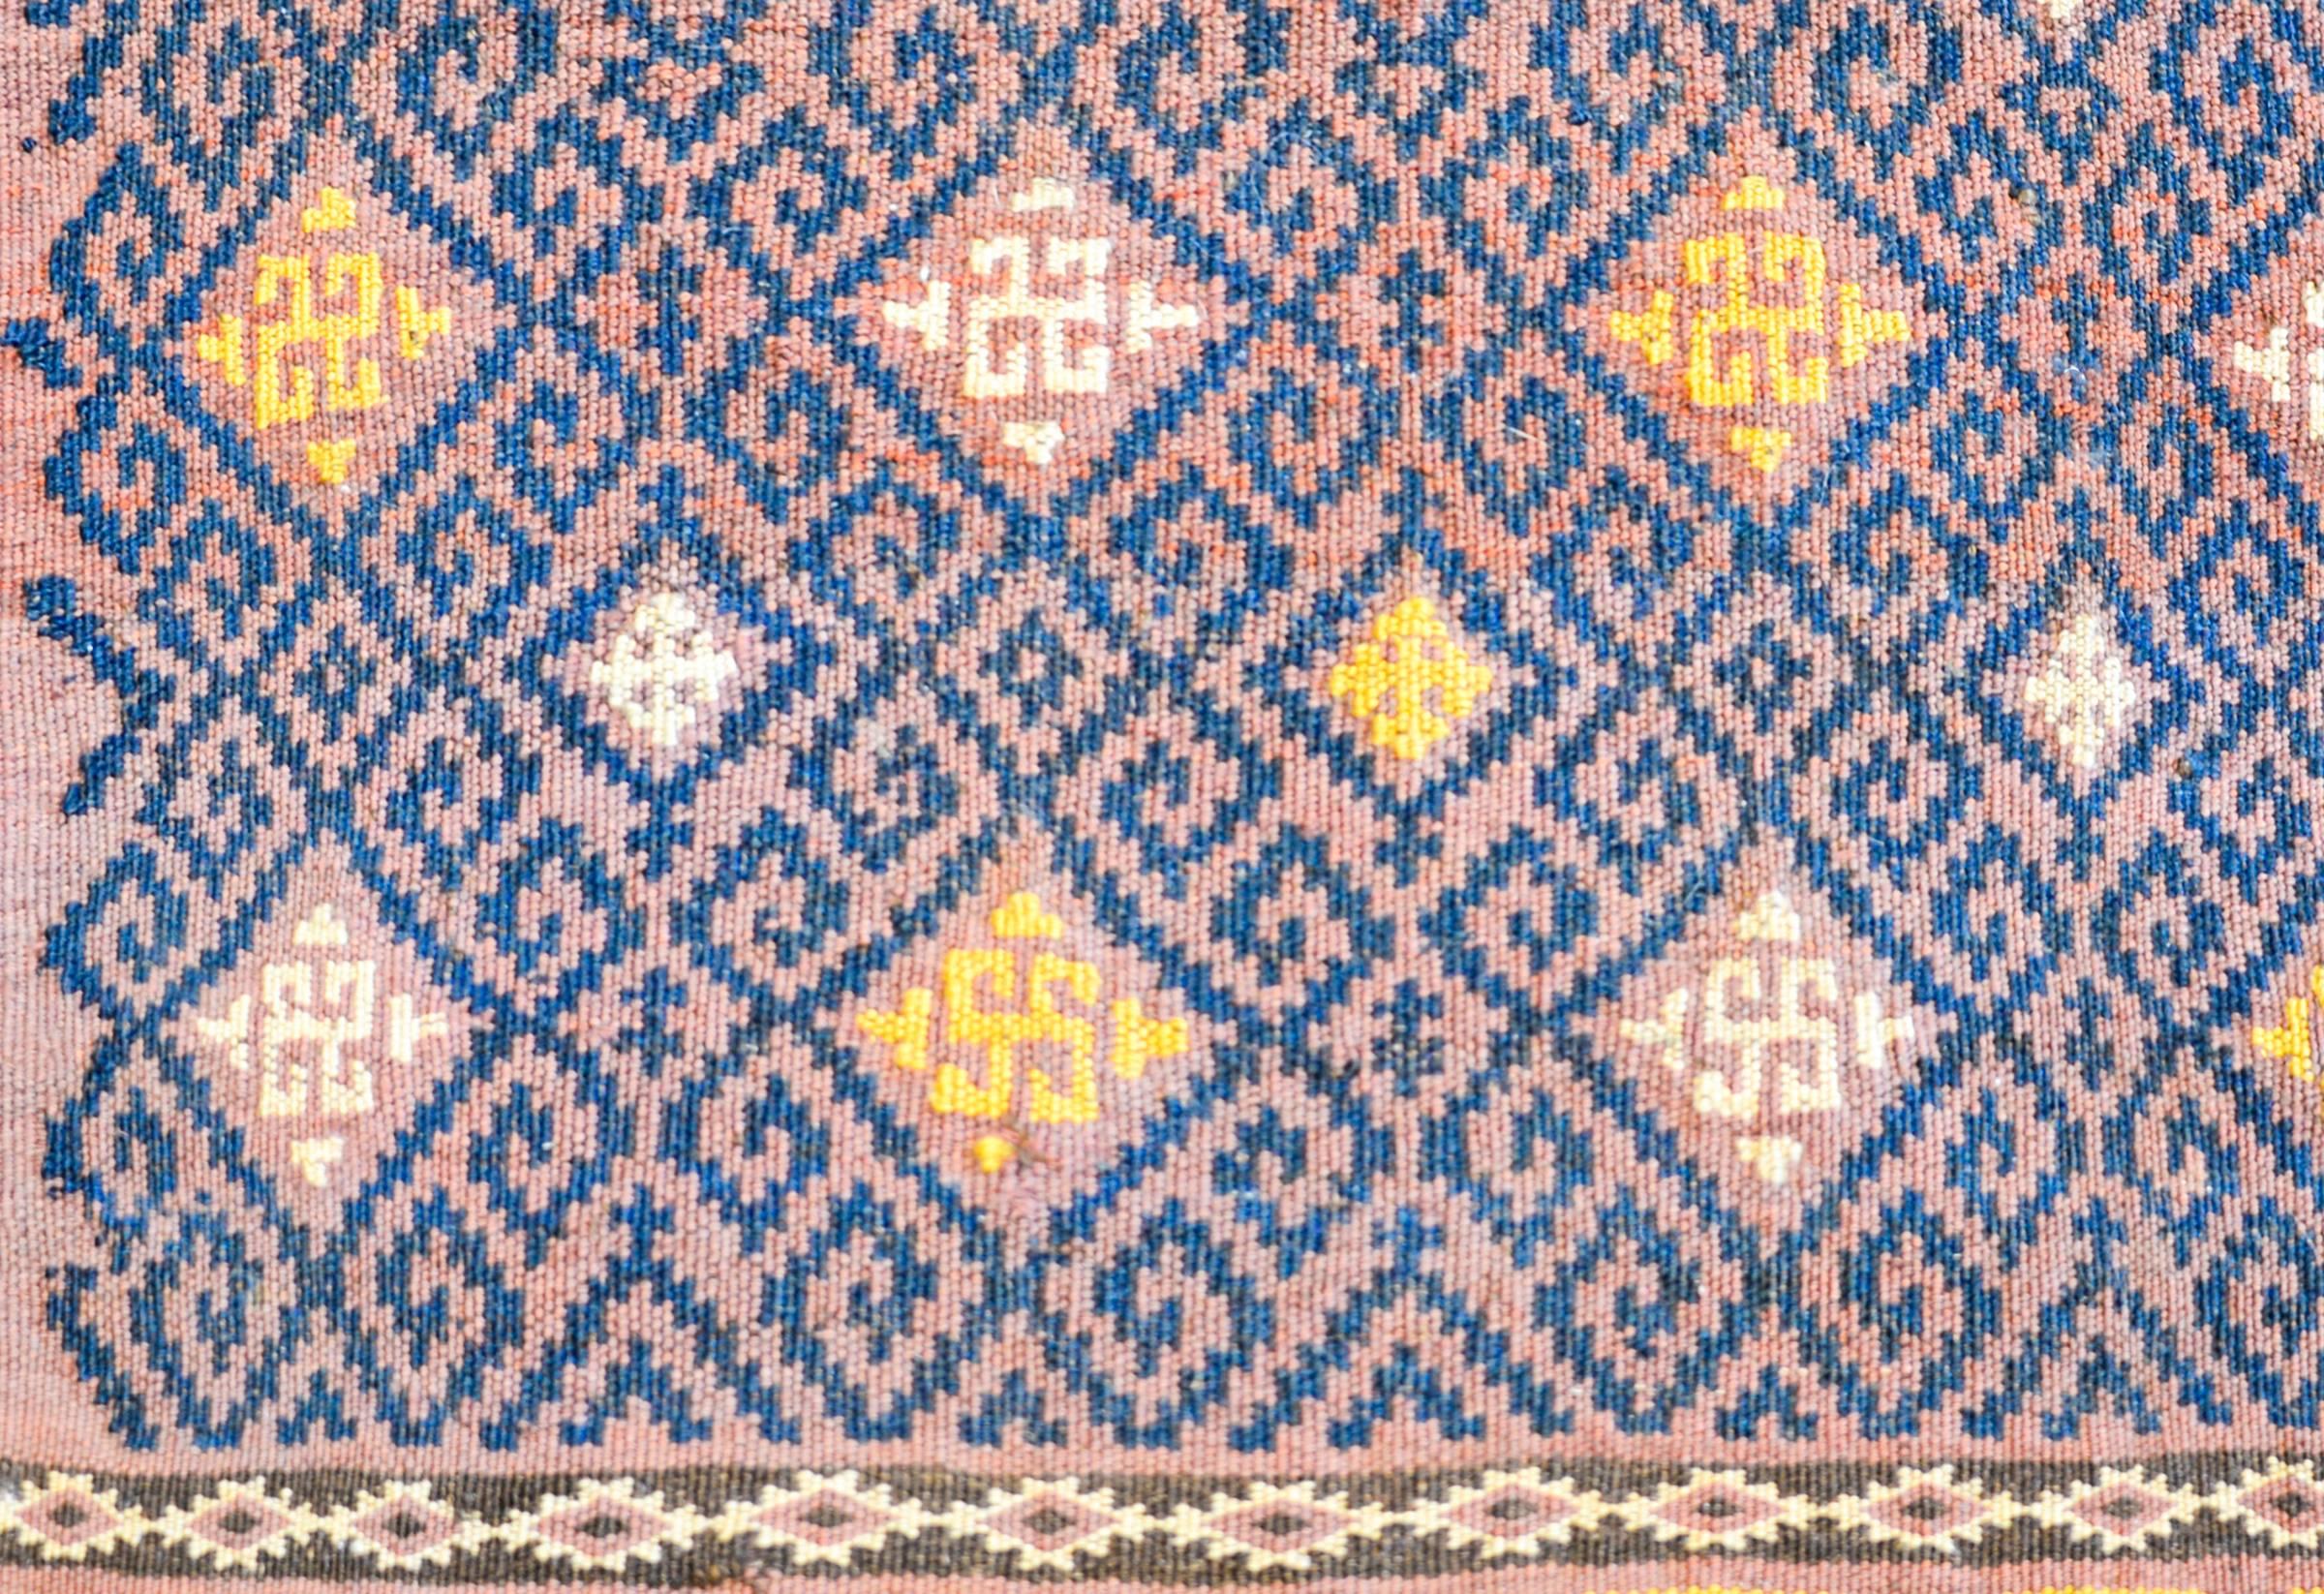 A wonderful early 20th century Uzbek Sumak bag face rug with a wonderful pattern containing an all-over geometric form woven in indigo, yellow, and white, on a pale lavender background. The border is complex, with two petite stylized floral stripes,